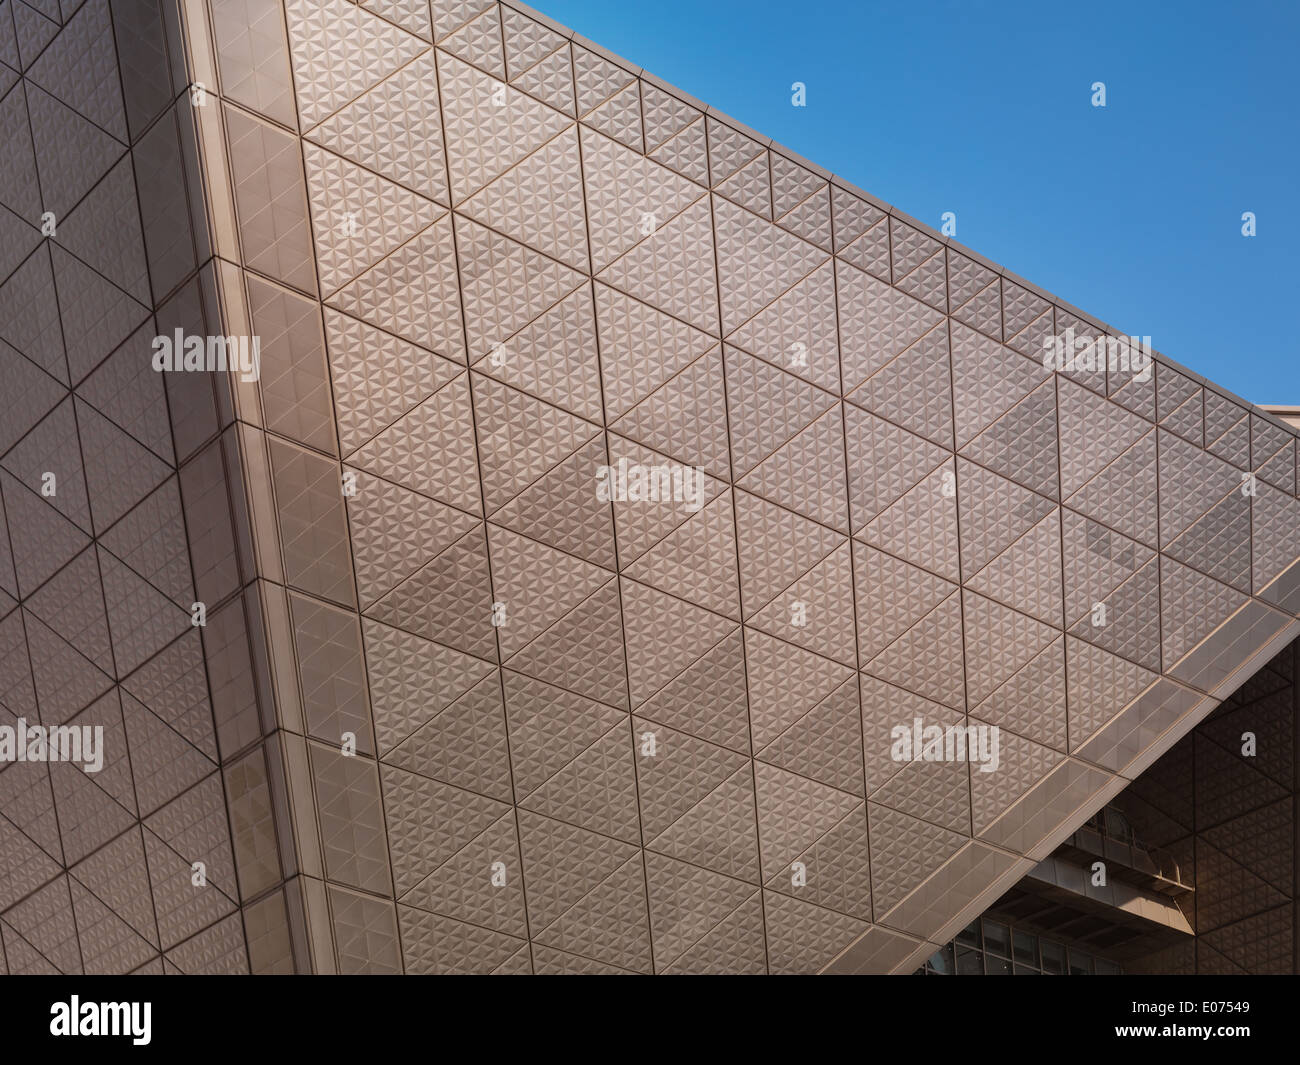 Abstract texture of metal architectural element with triangular pattern Stock Photo